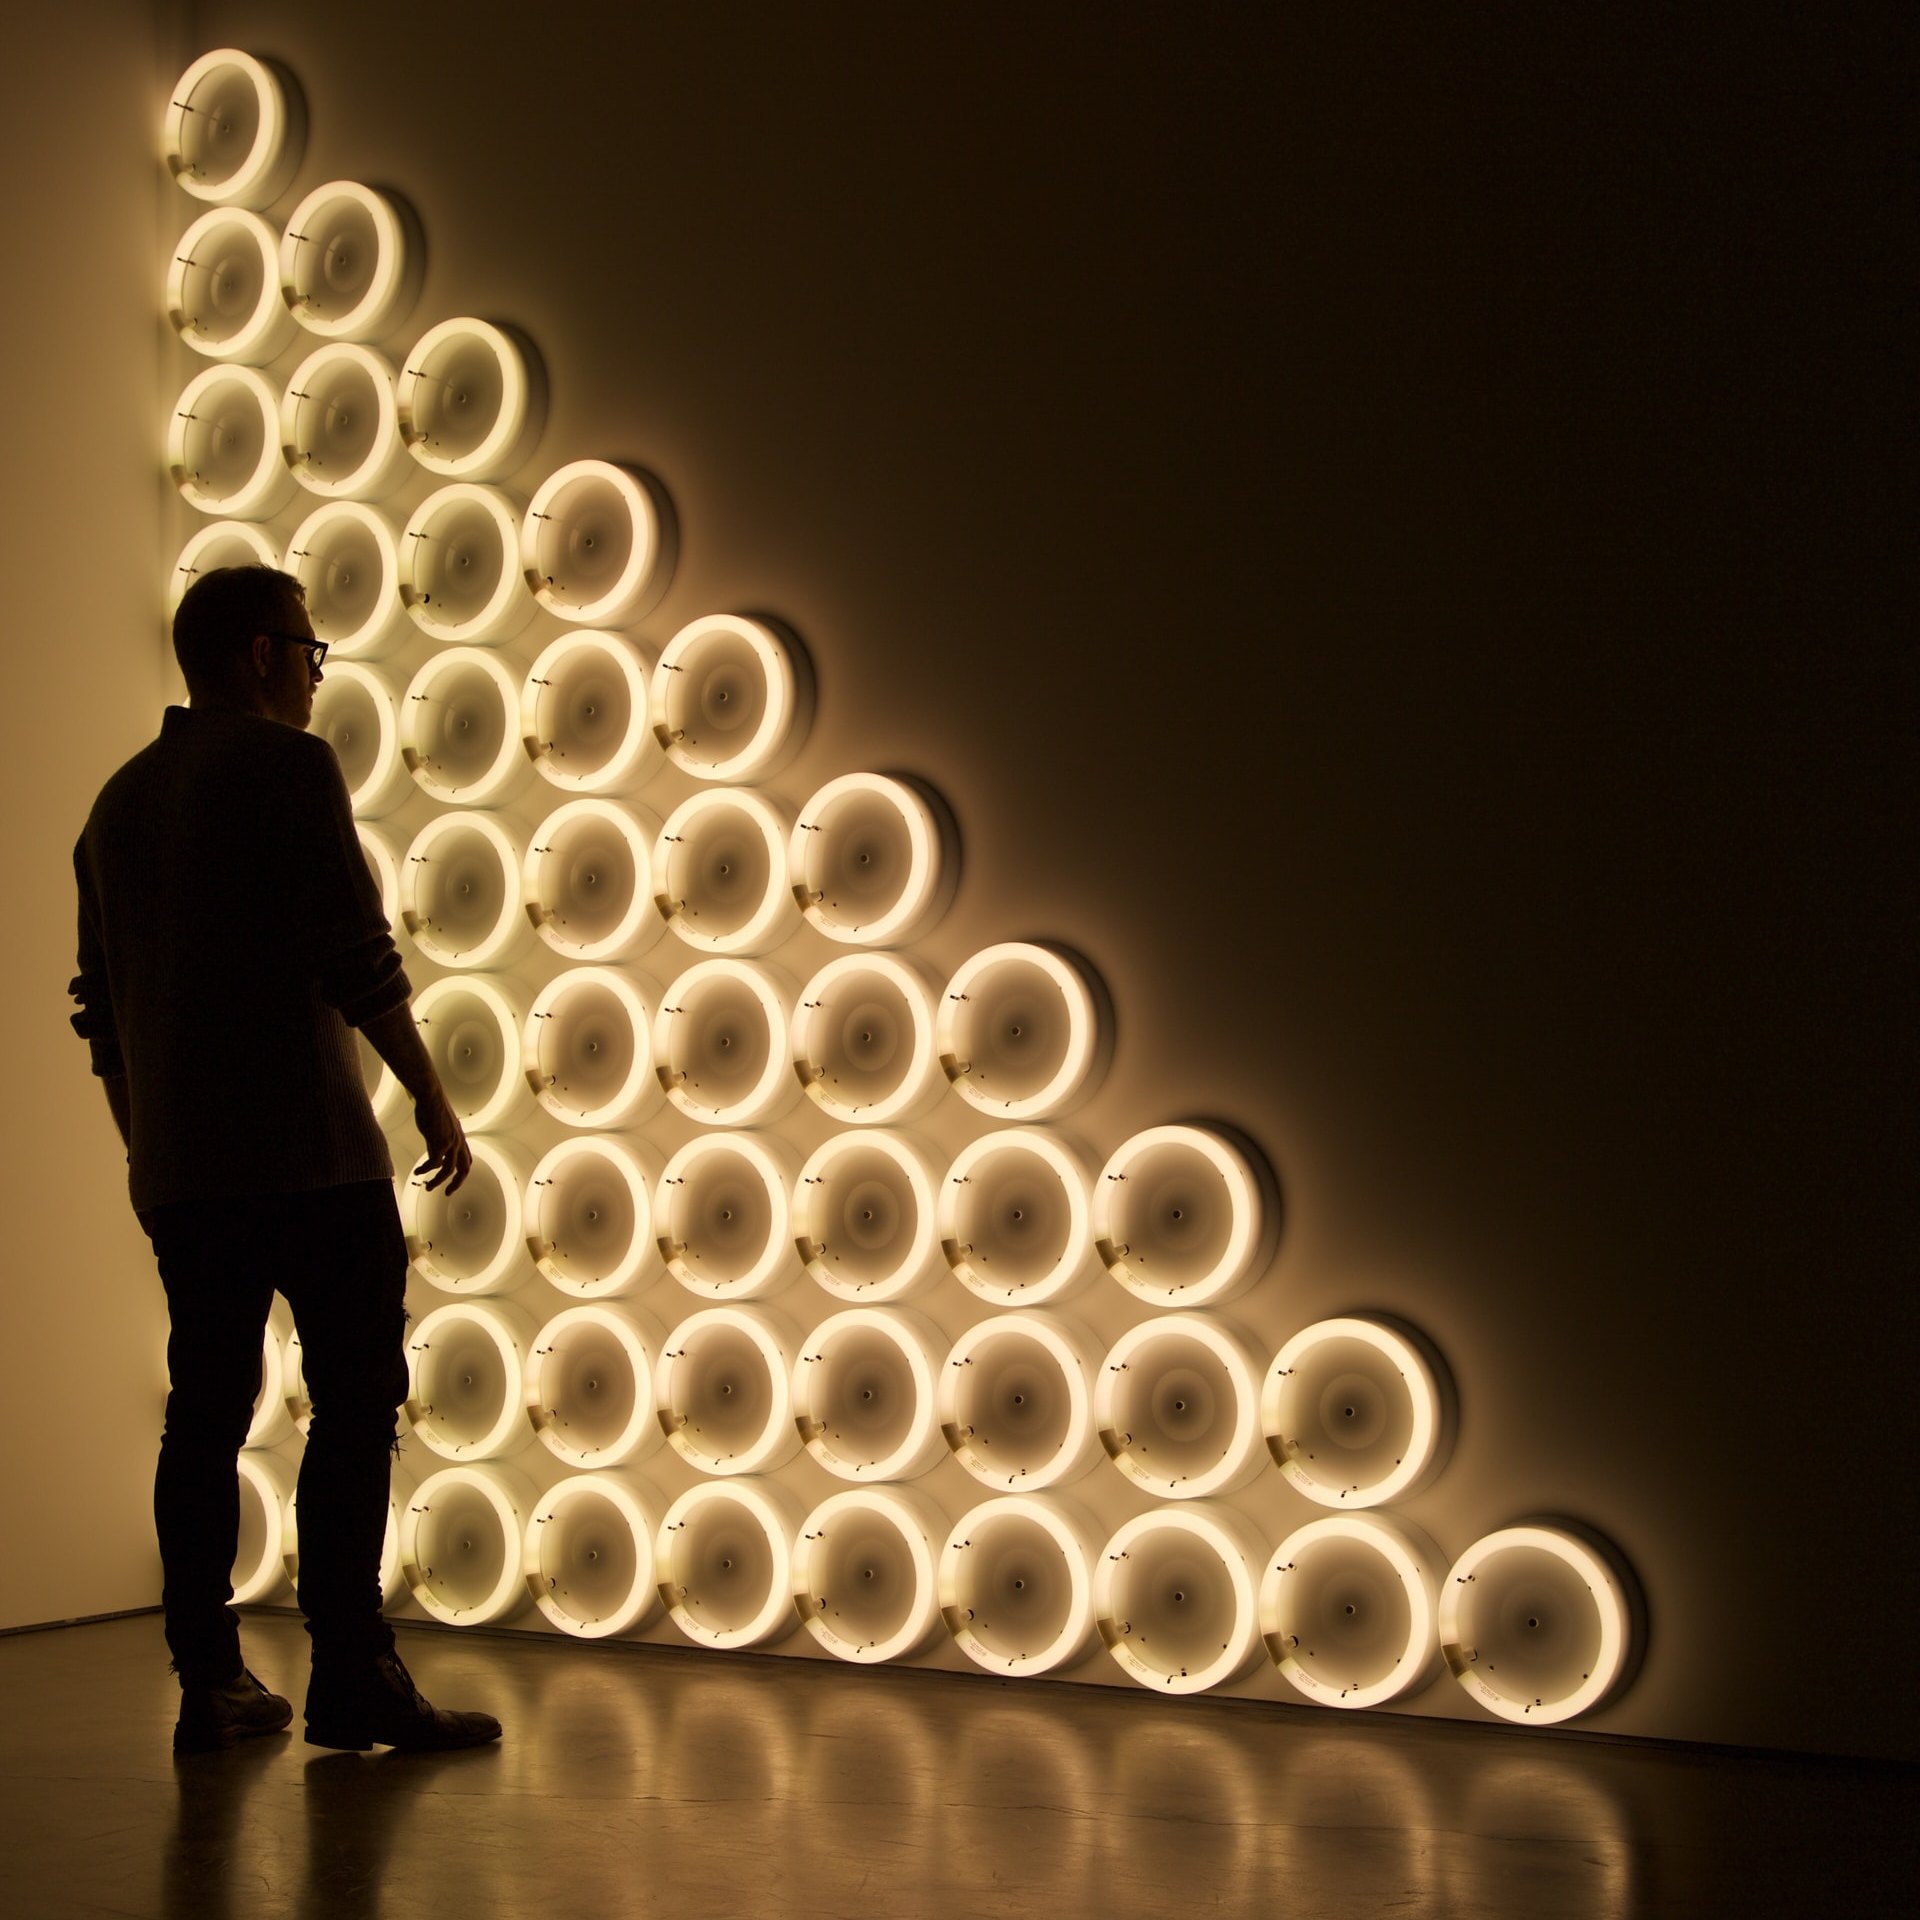 Everything You Need to Know About Light Installation Art